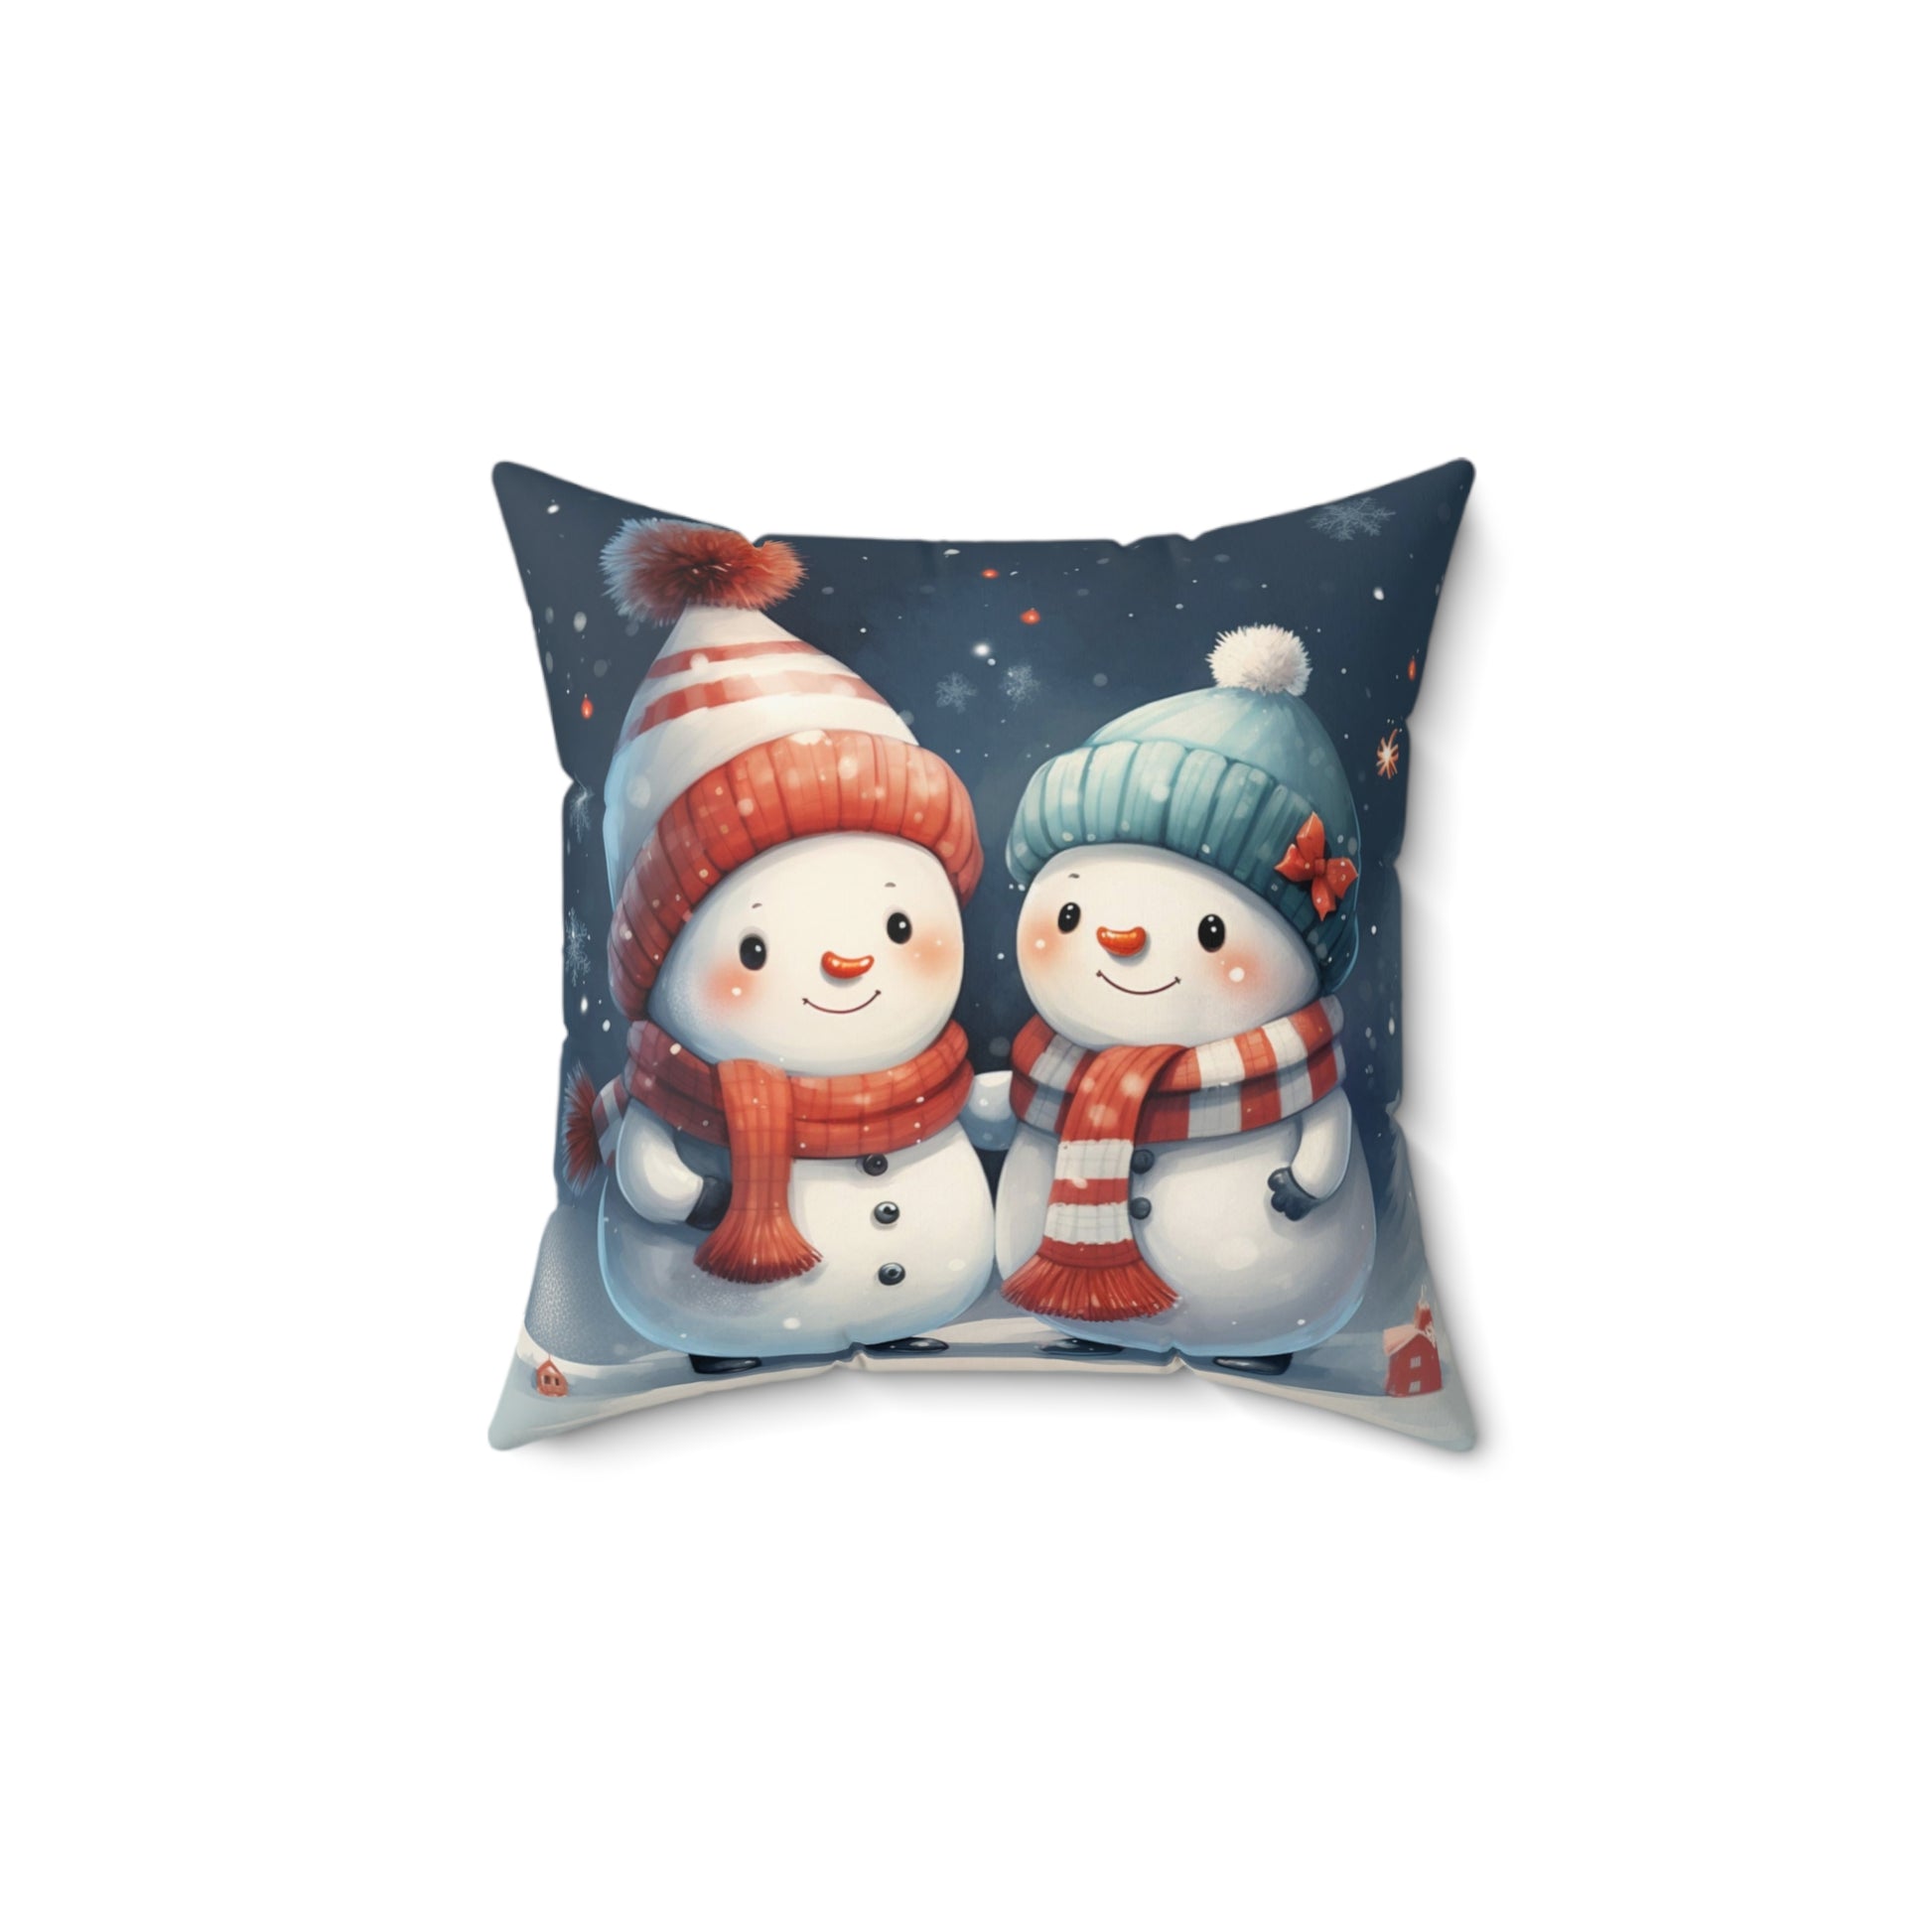 Snowman Couple Filled Pillow with Insert, Cute Christmas Xmas Square Throw Accent Decorative Room Decor Floor Sofa Couch Cushion Starcove Fashion